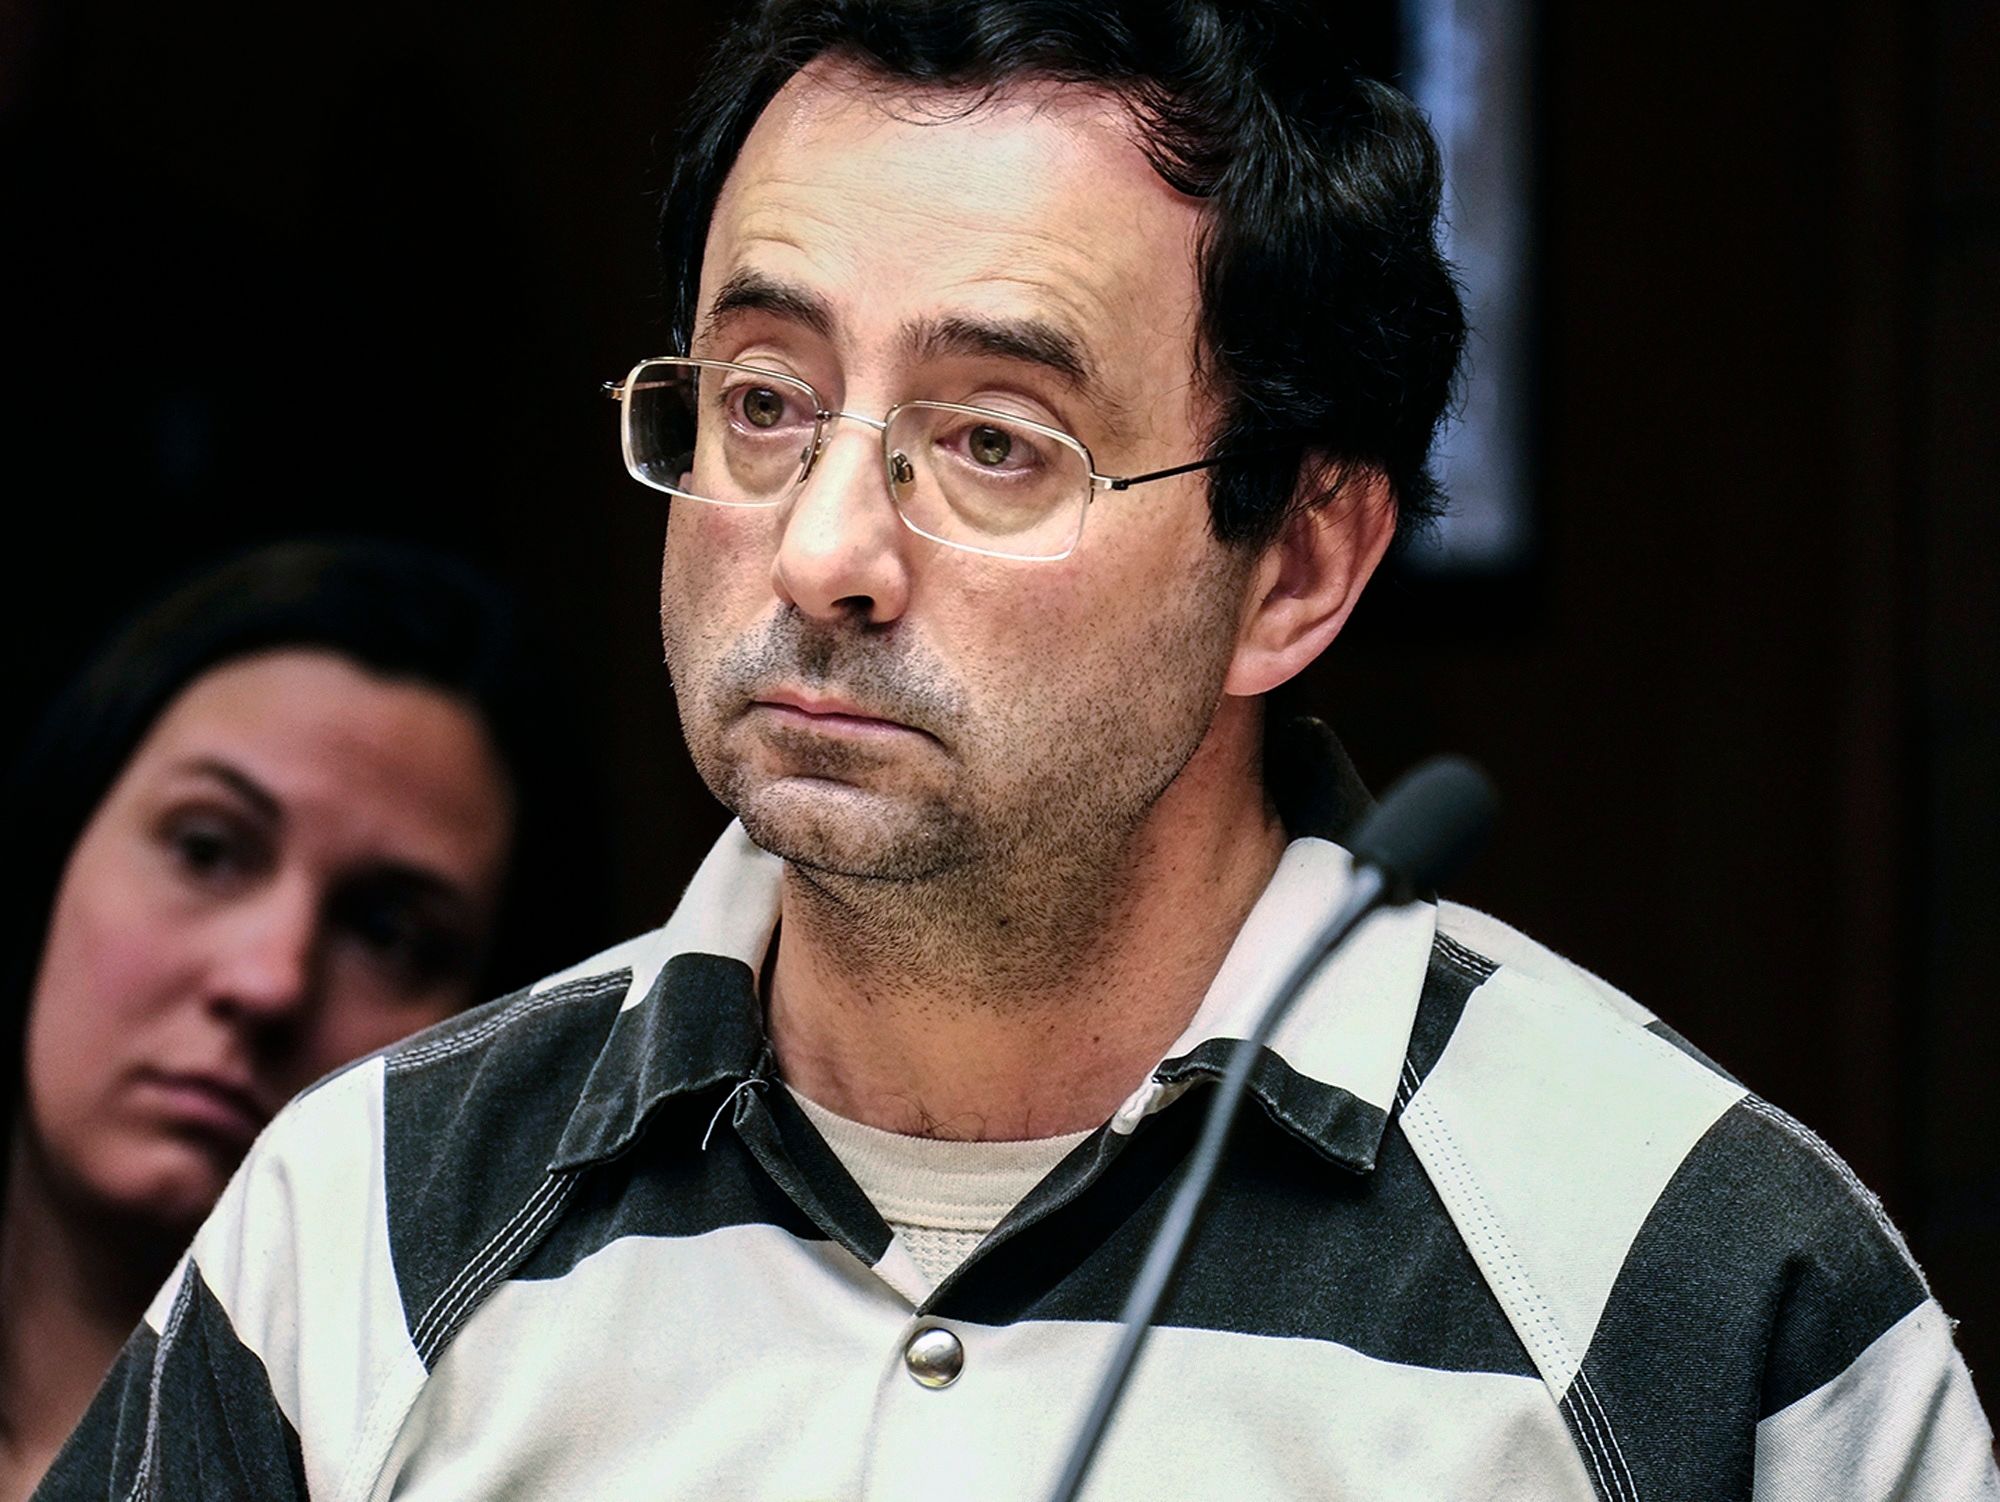 Gymnastics scandal reveals wider issue of Olympic sex abuse The Seattle Times pic